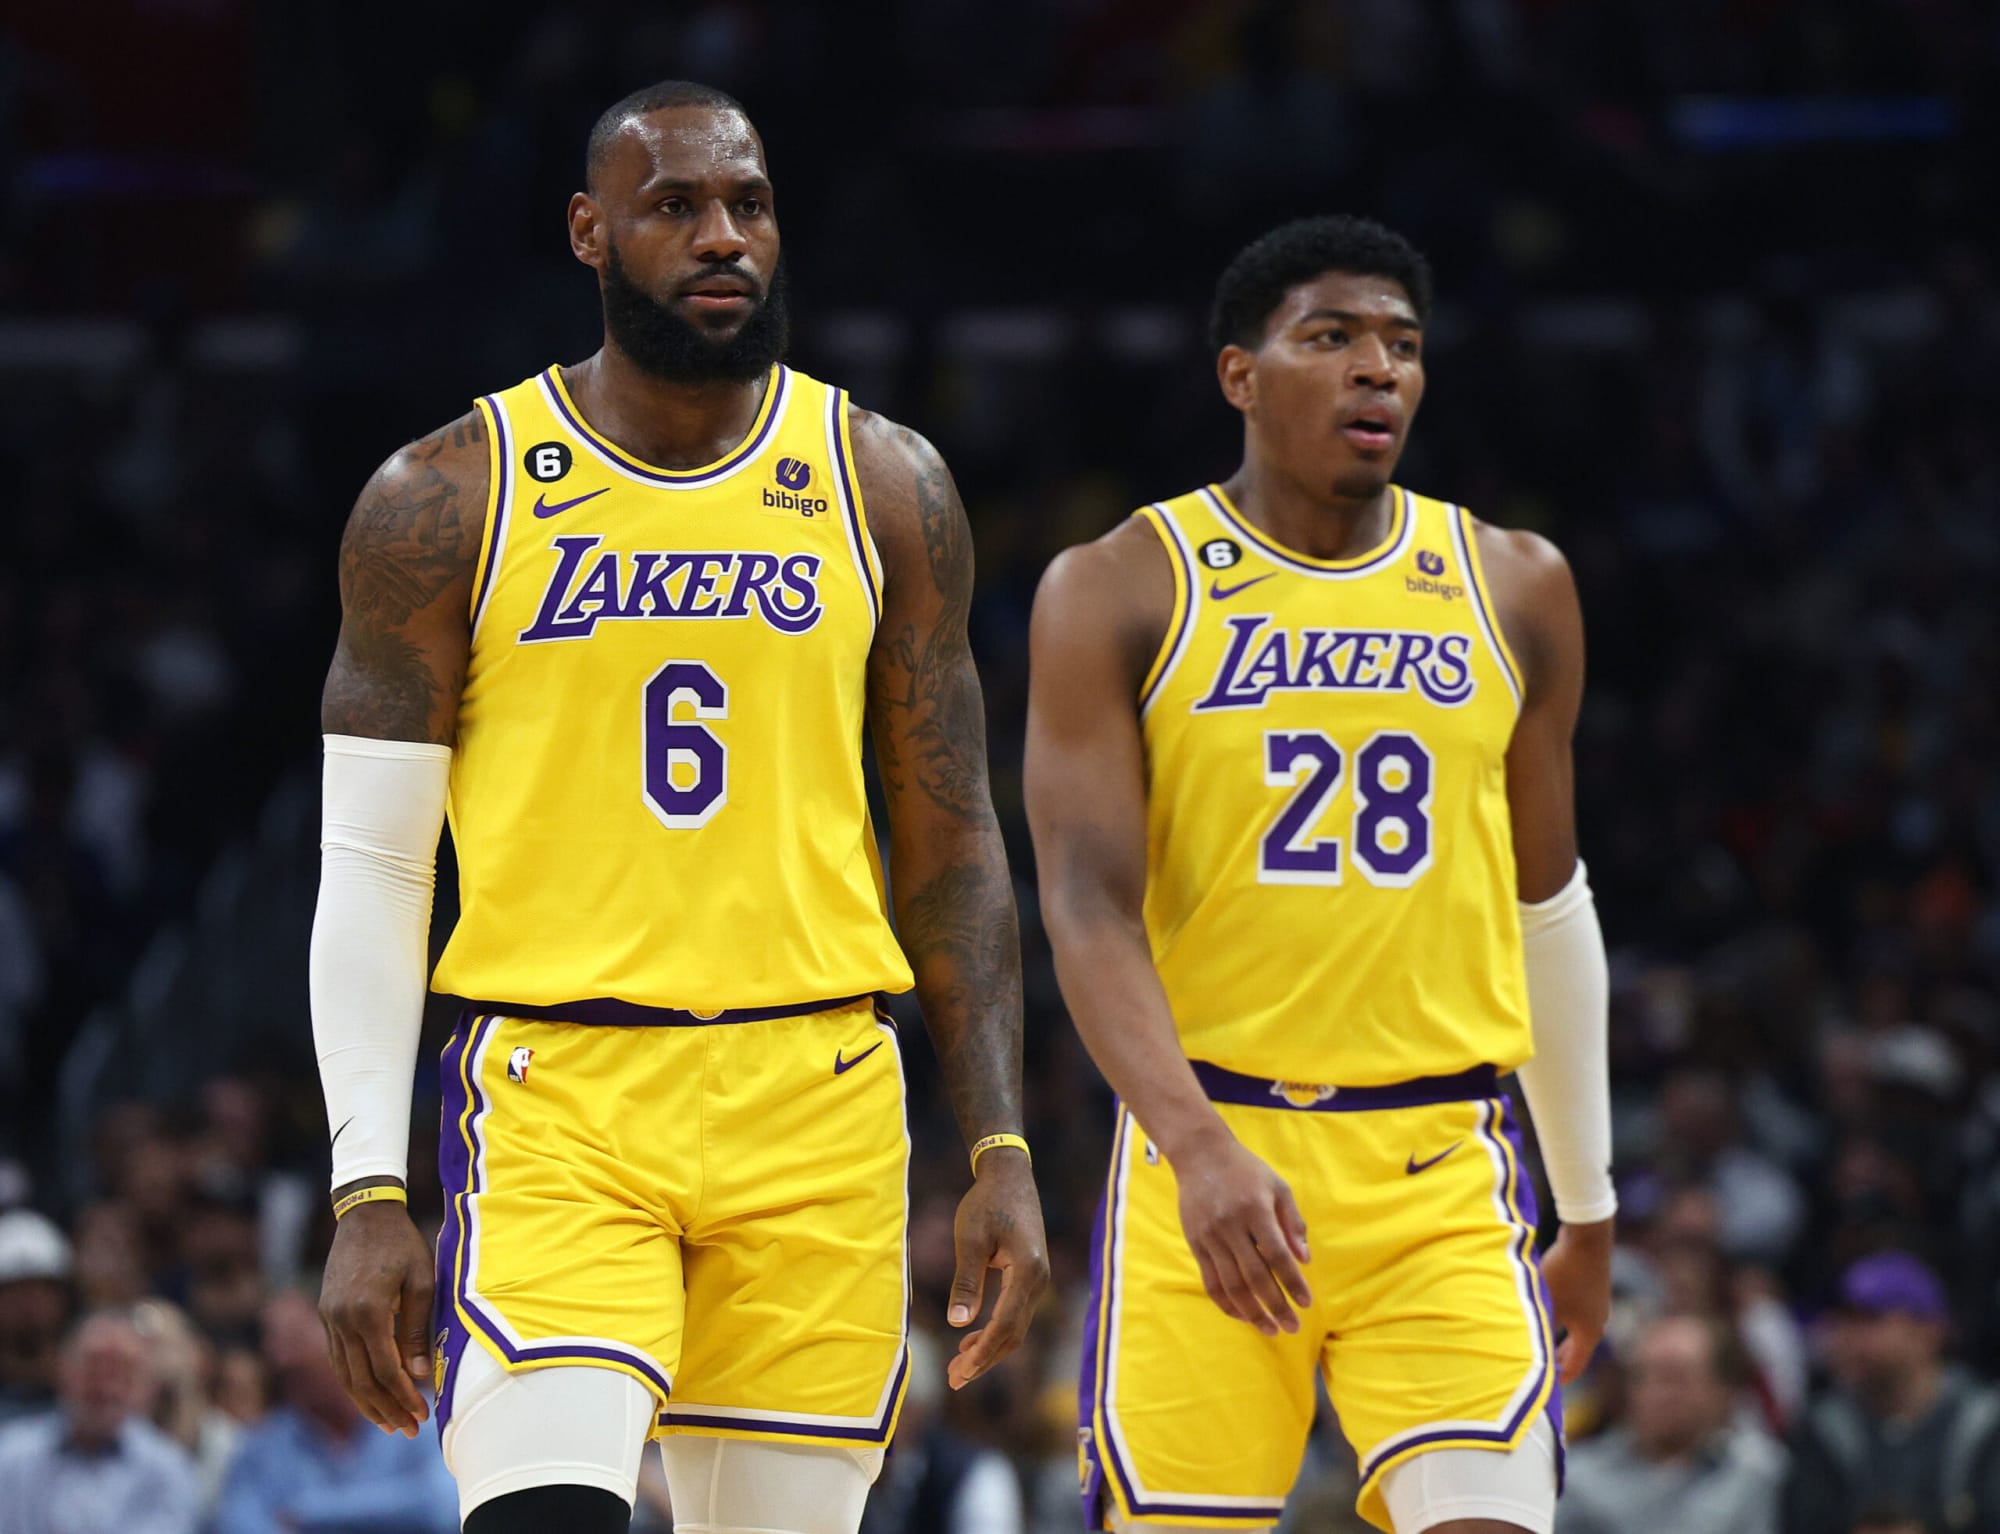 Lakers Rumors: LeBron James Expected To Be Ready By Training Camp